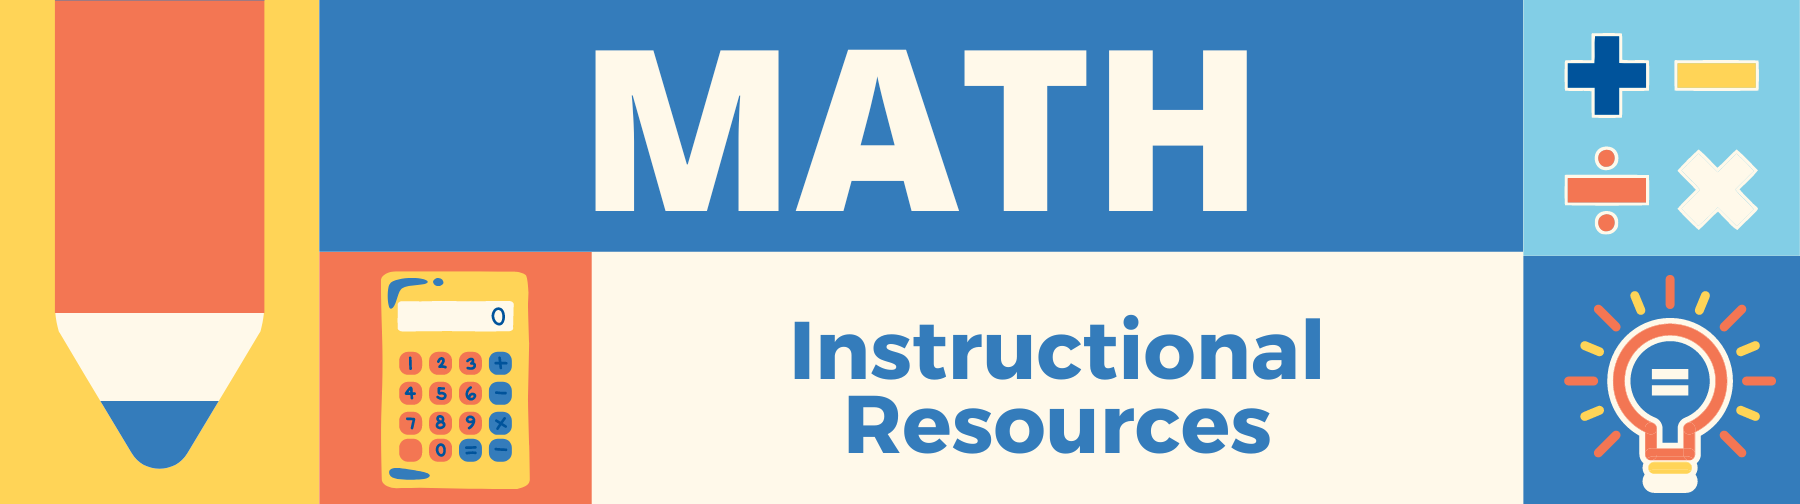 banner saying Math instructional resources